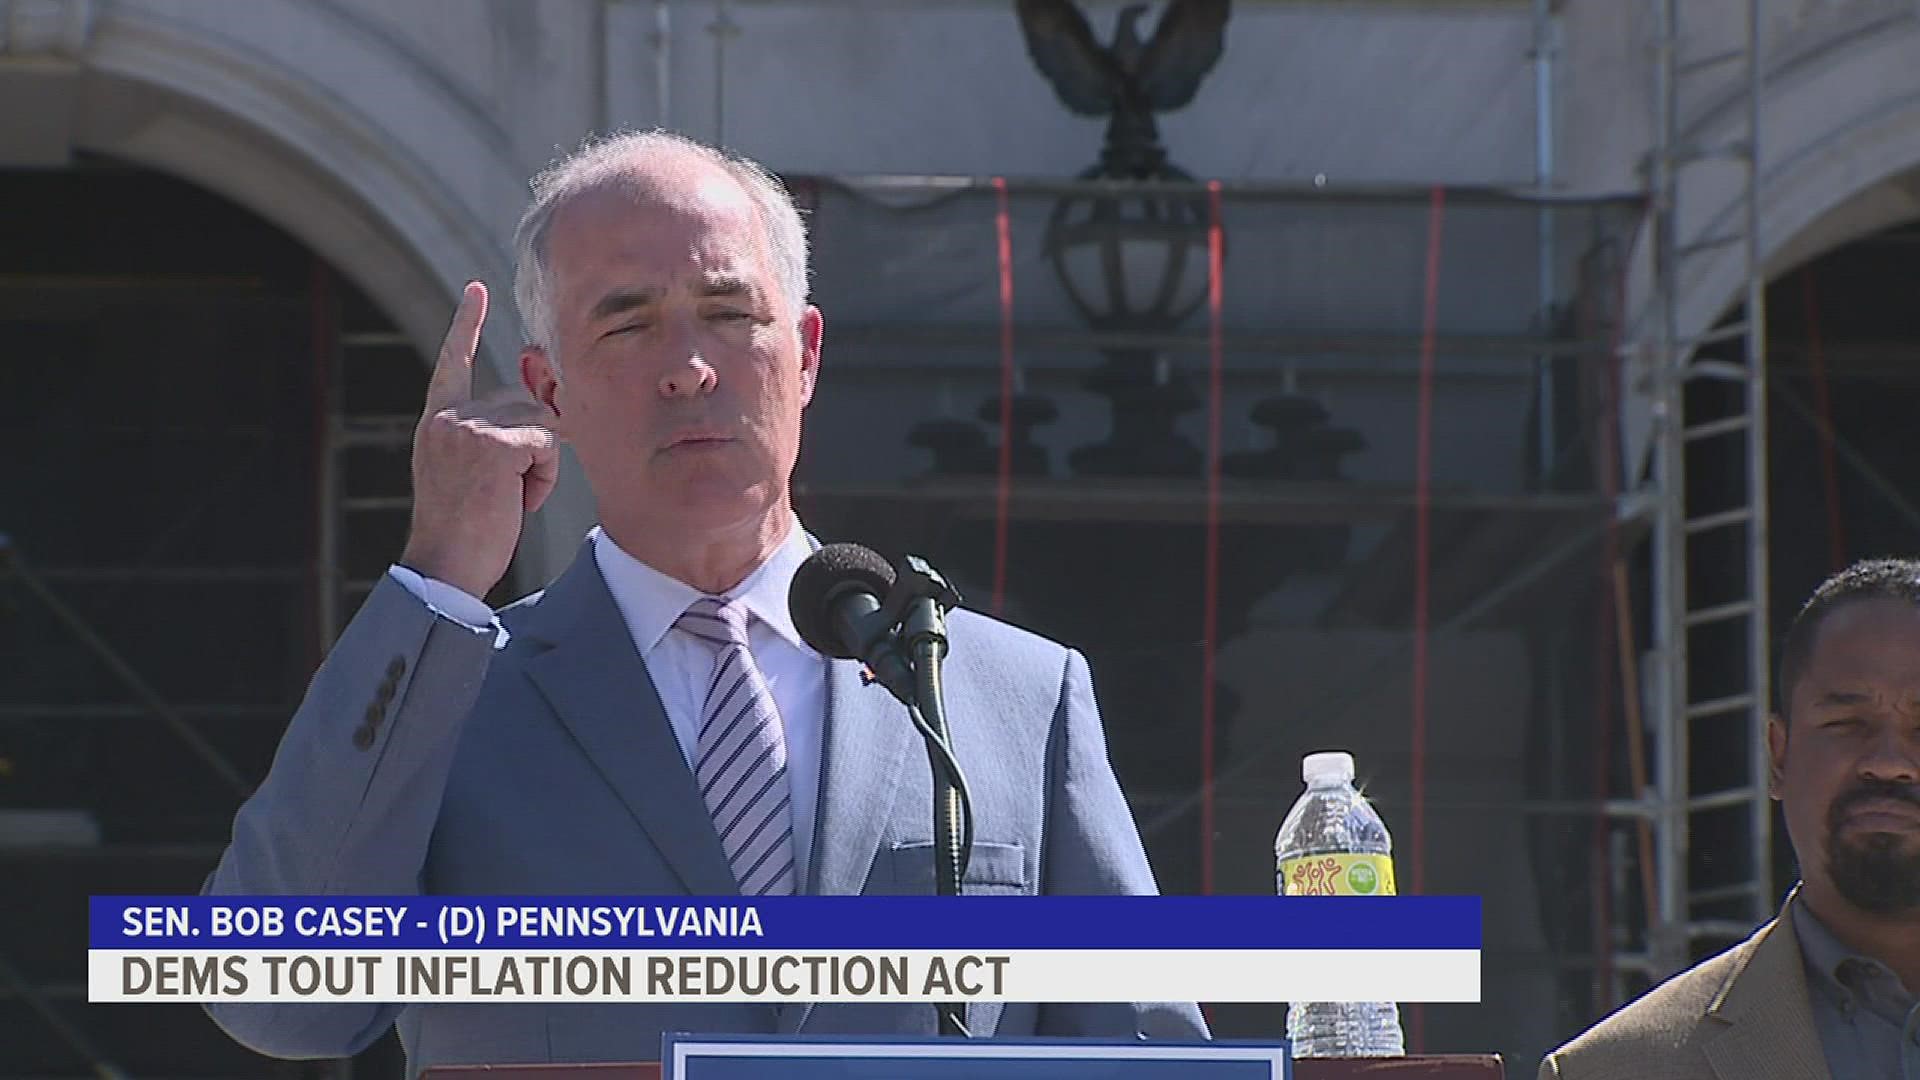 Sen. Casey said the legislation will lower health care, prescription drug costs, and ensure American manufacturing is at the forefront of the clean energy industry.